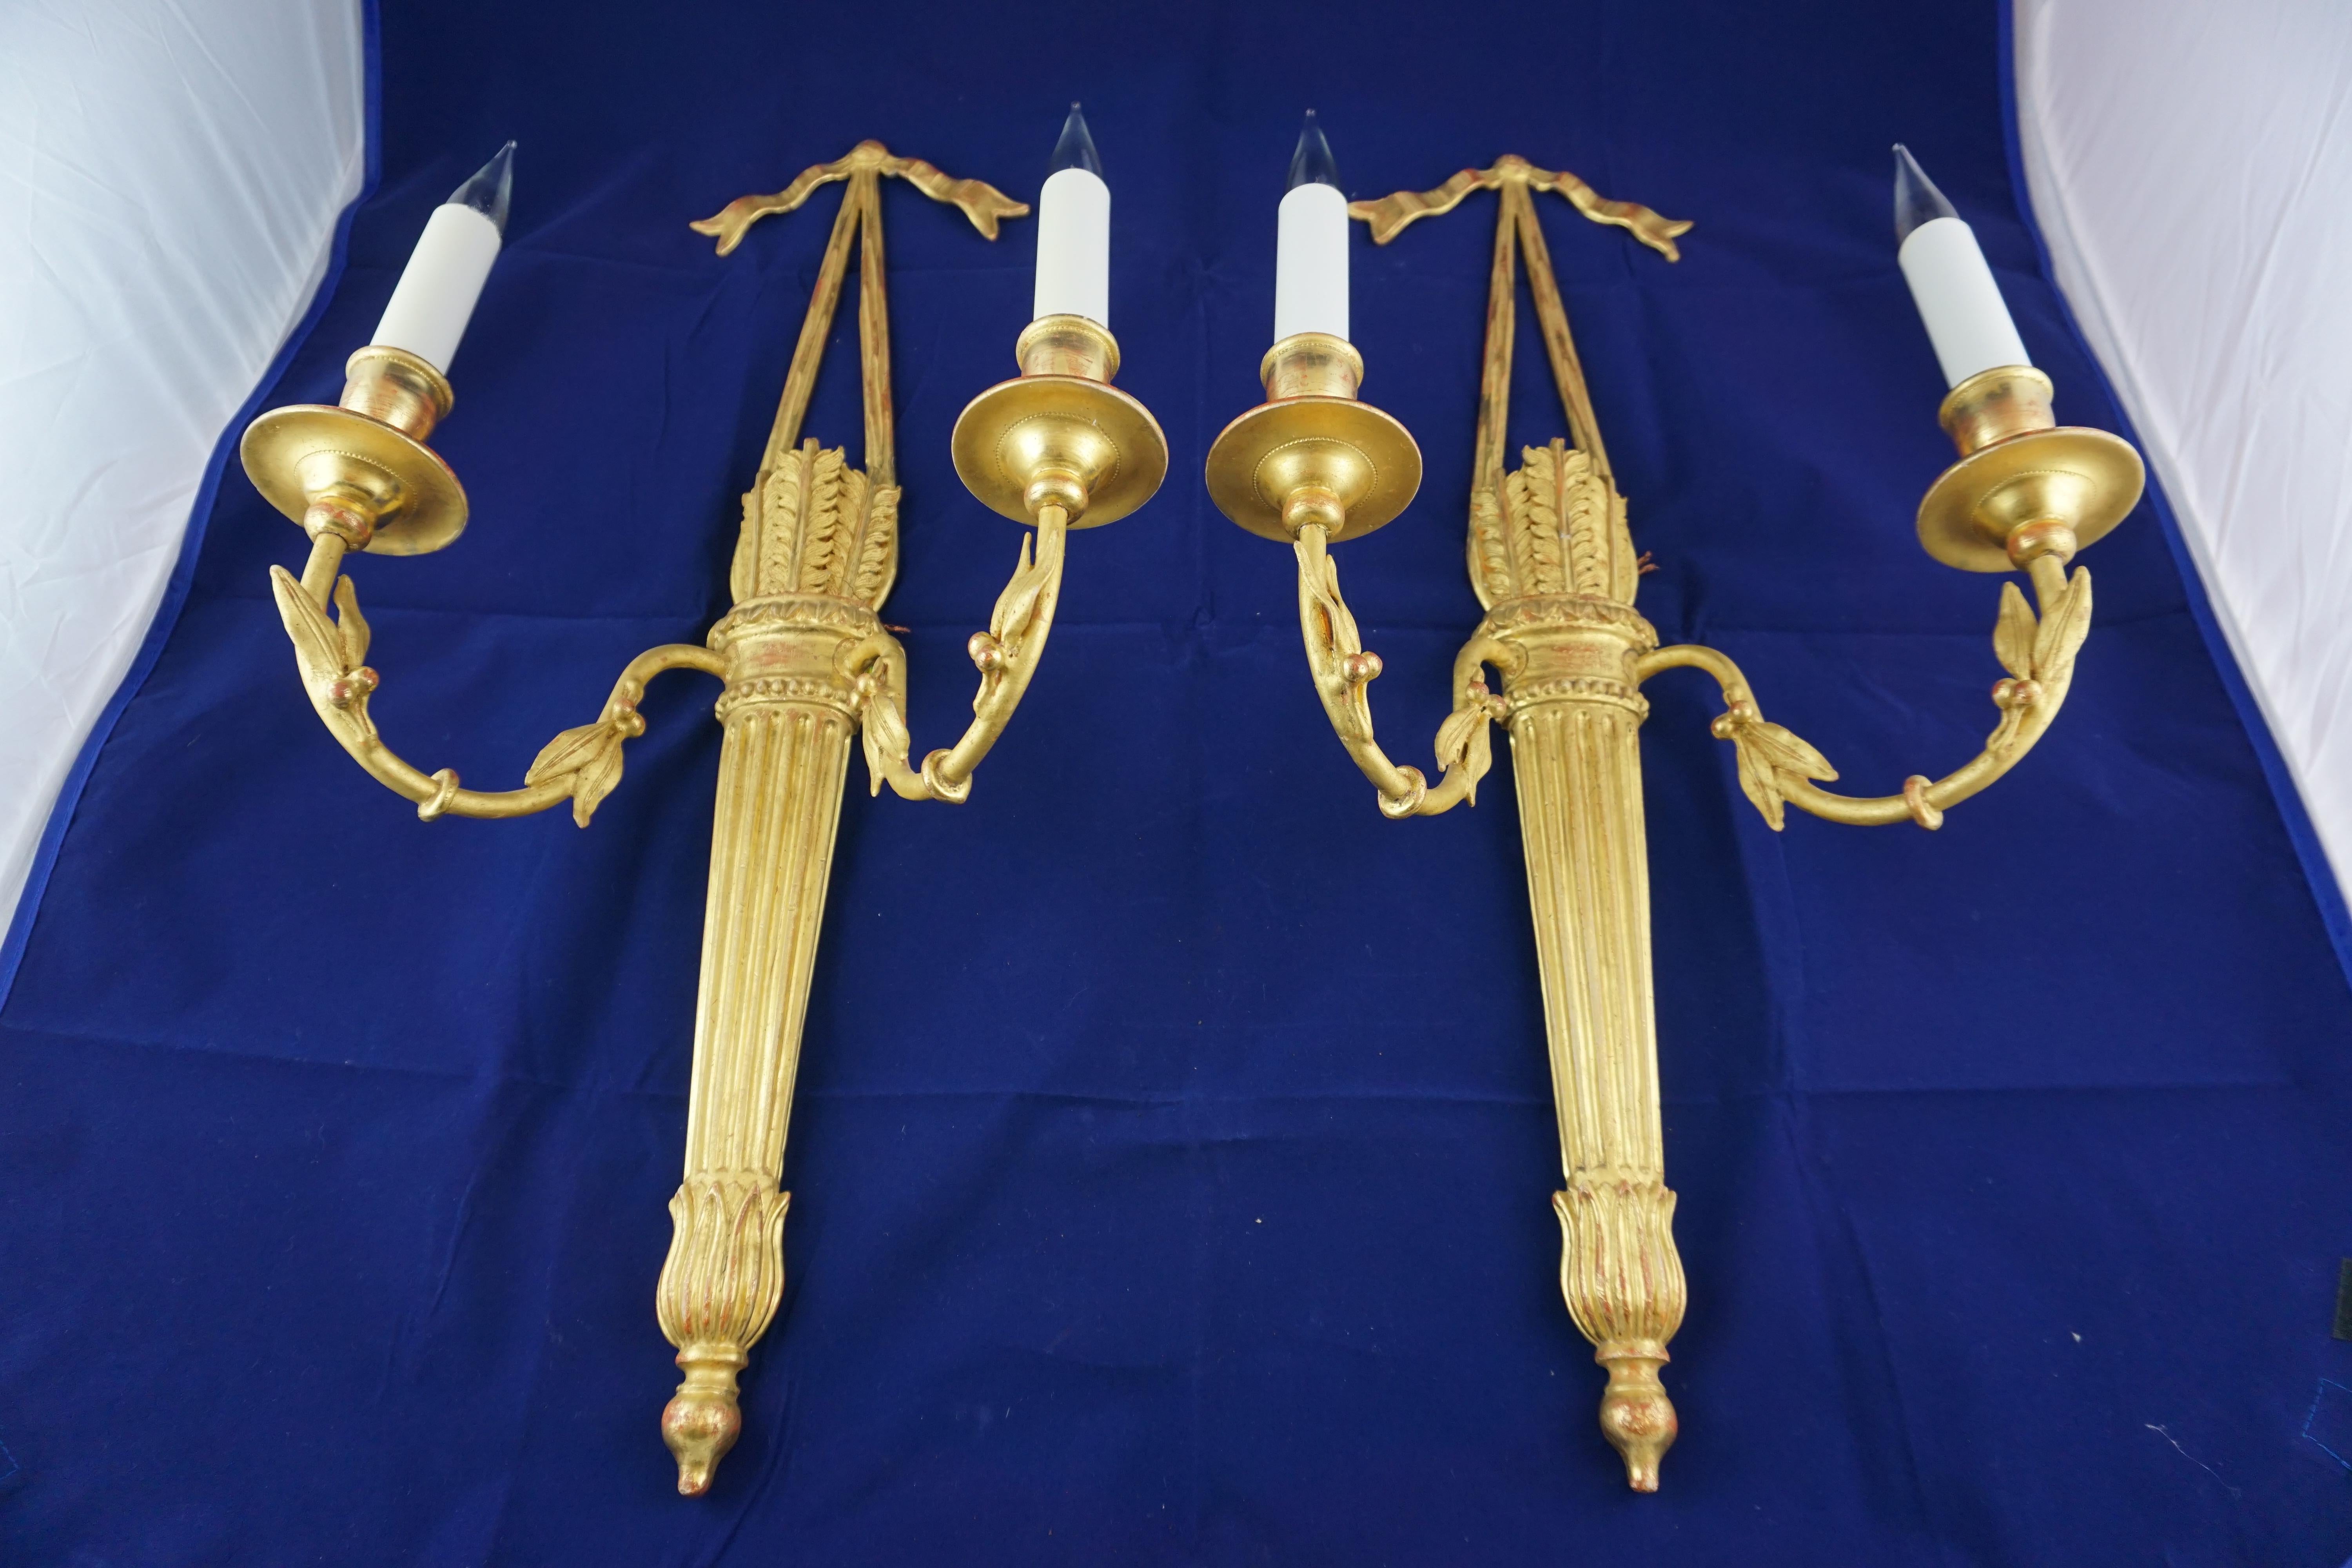 These handed, carved wood and gilded Louis XVI-style quiver wall lights with two lights, were made by the great firm of Leone Cei. Located in the heart of Florence, Italy since 1902, they work in ways that have not changed for over 500 years (except